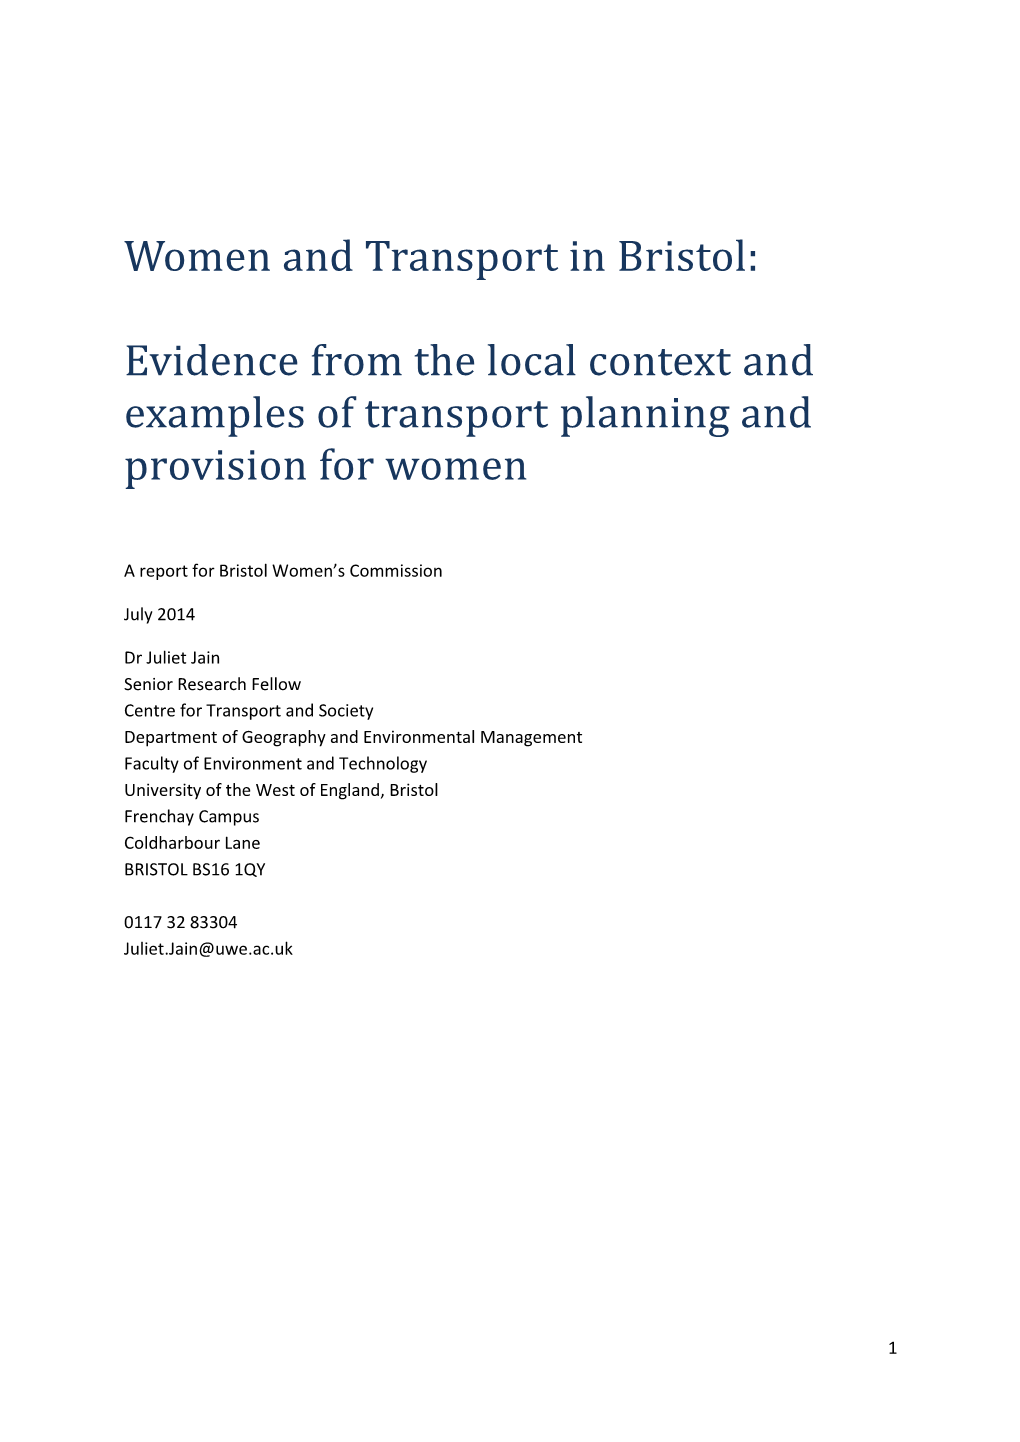 Women and Transport in Bristol